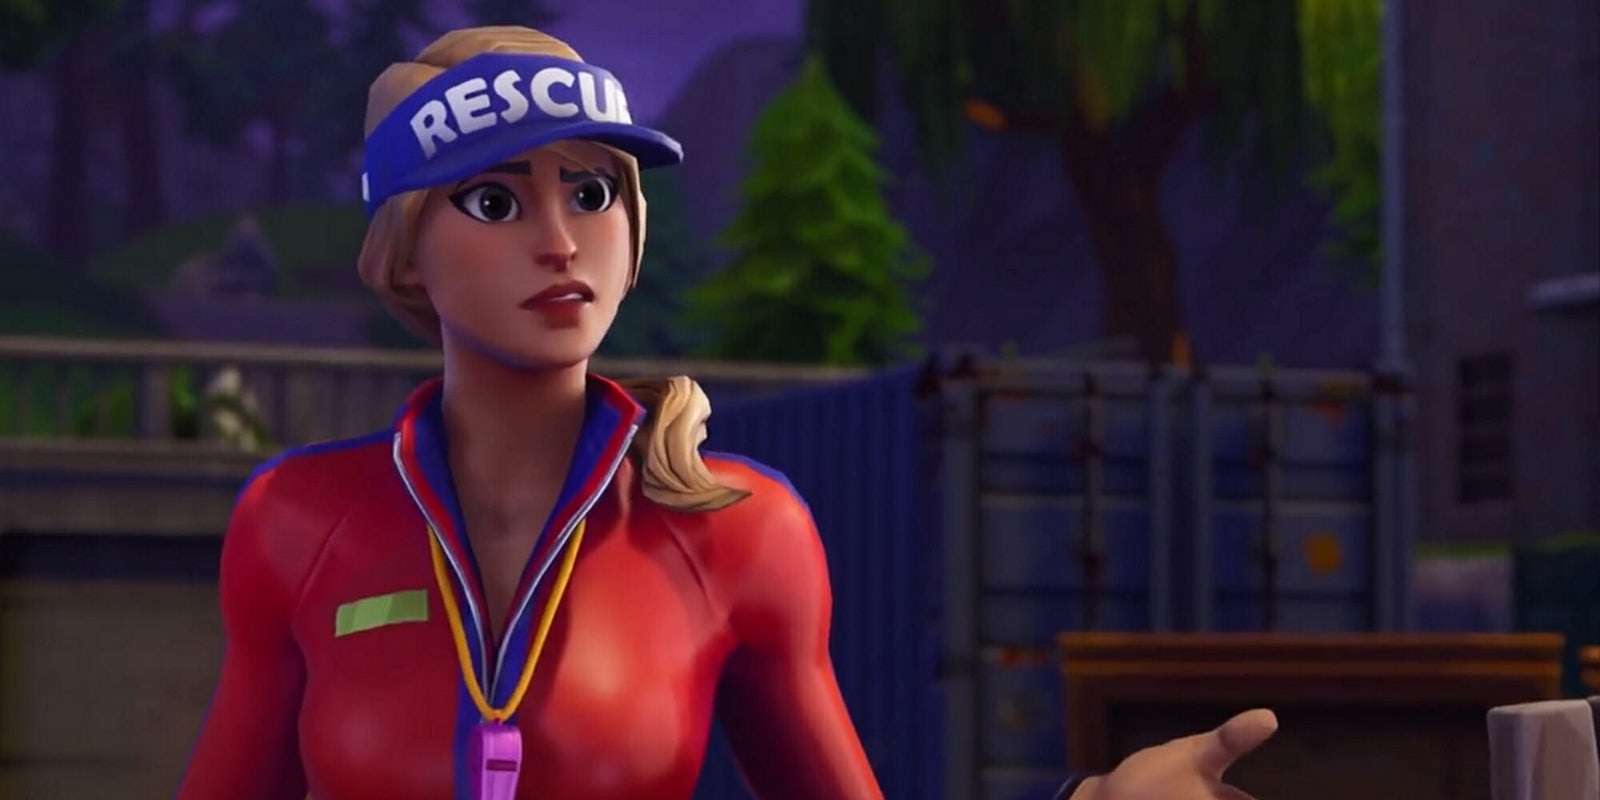 Fortnite porn searches skyrocketed after Season 6 was announced.